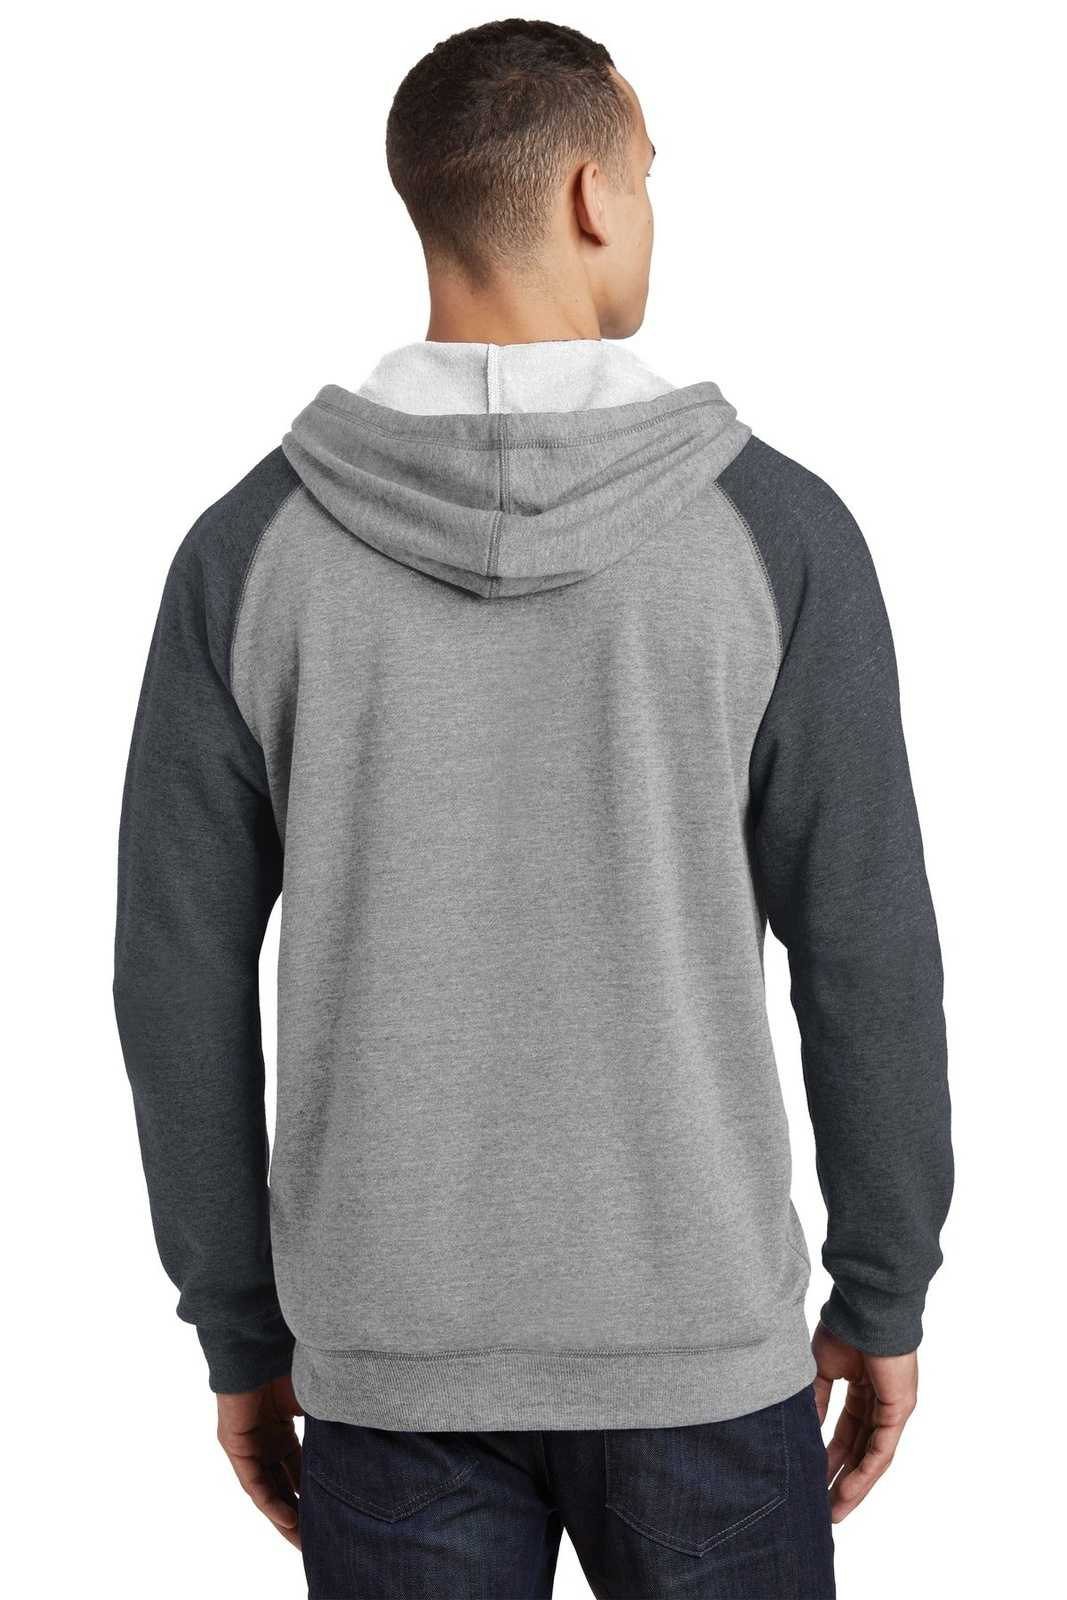 District DT196 Young Mens Lightweight Fleece Raglan Hoodie - Heathered Gray Heathered Charcoal - HIT a Double - 2